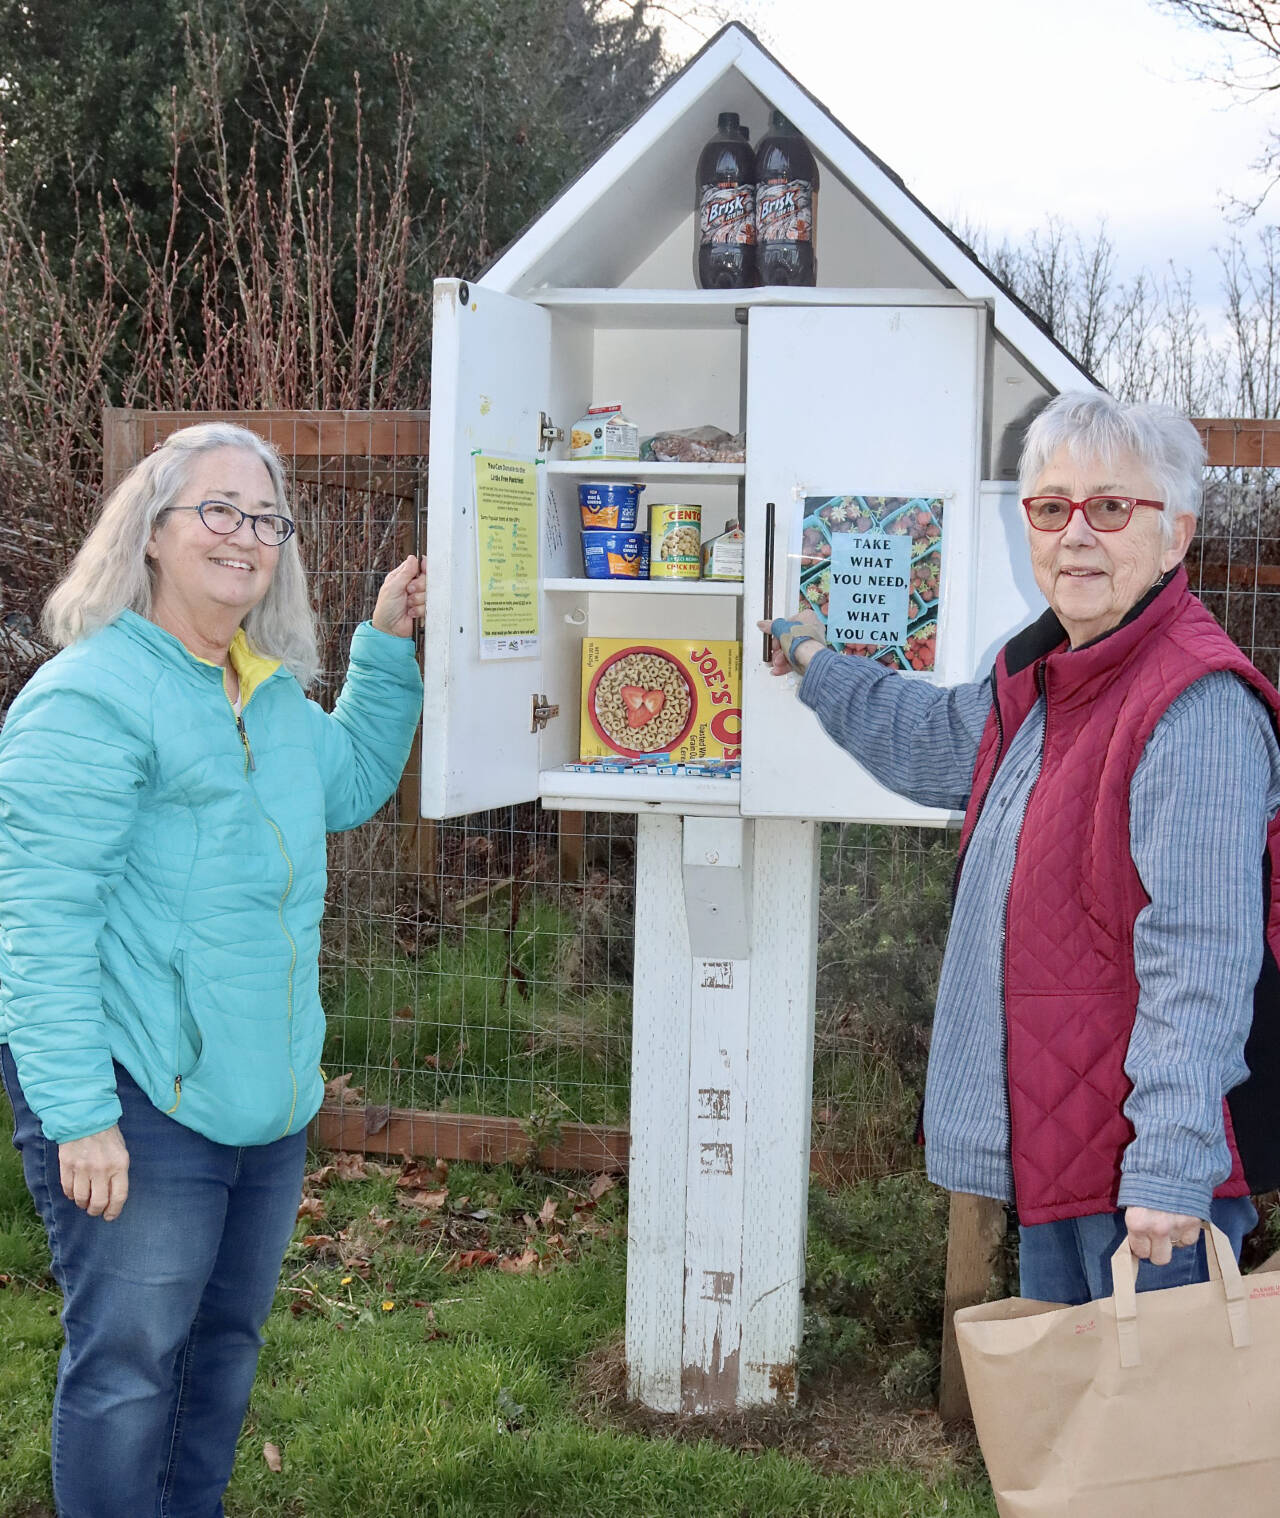 Martha Bell, left, and Nancy Jacobson put new donations into the Little Free Pantry box at 316 S. Cherry St. that is sponsored by First Presbyterian Church in Port Angeles. (Dave Logan/For Peninsula Daily News)